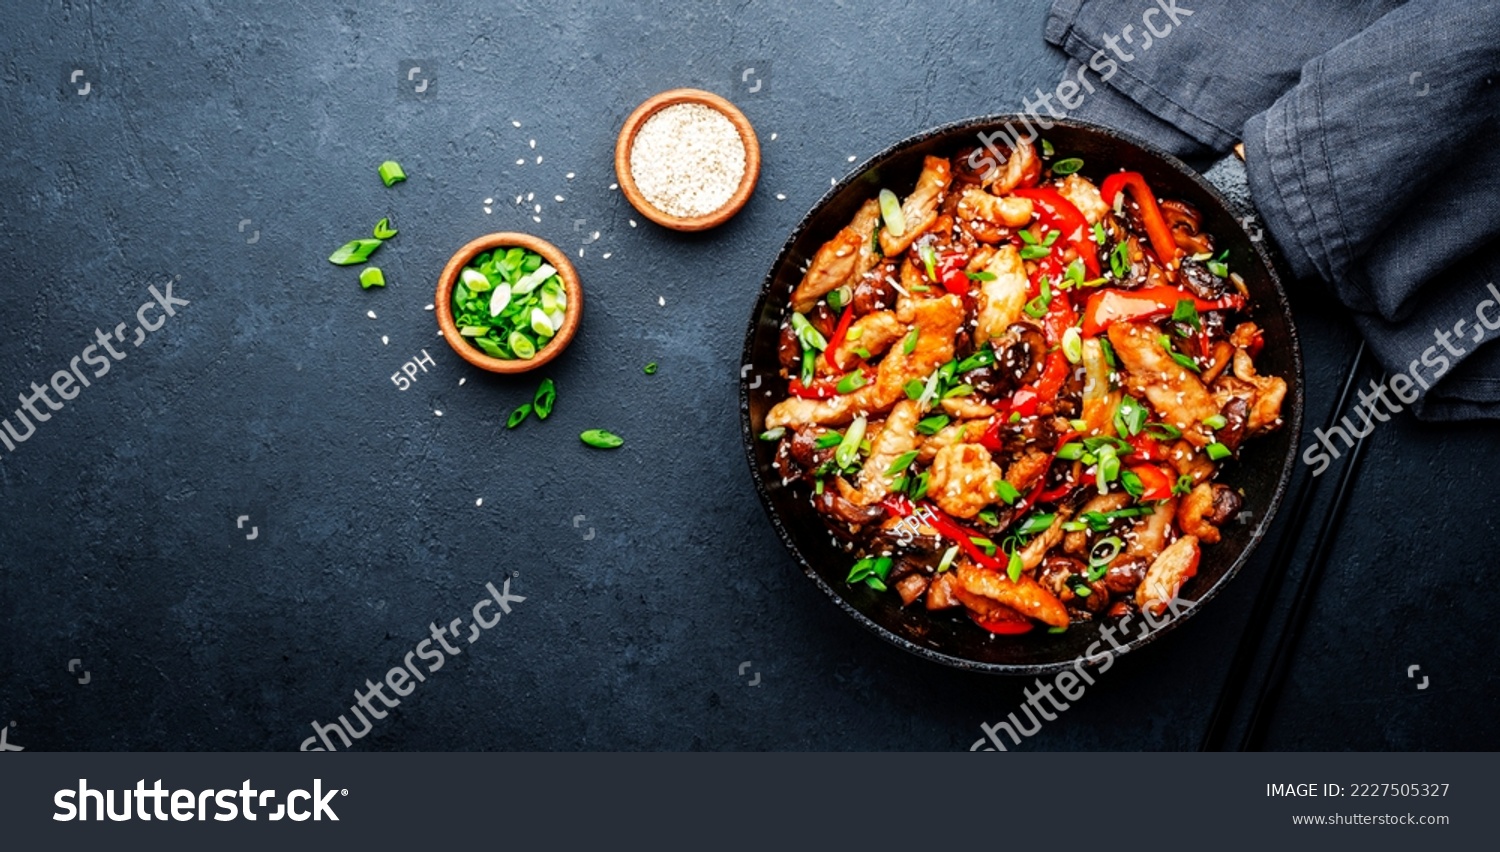 Stir fry with turkey fillet, paprika, mushrooms, green chives and sesame seeds in frying pan. Asian cuisine dish. Black stone kitchen table background, top view #2227505327